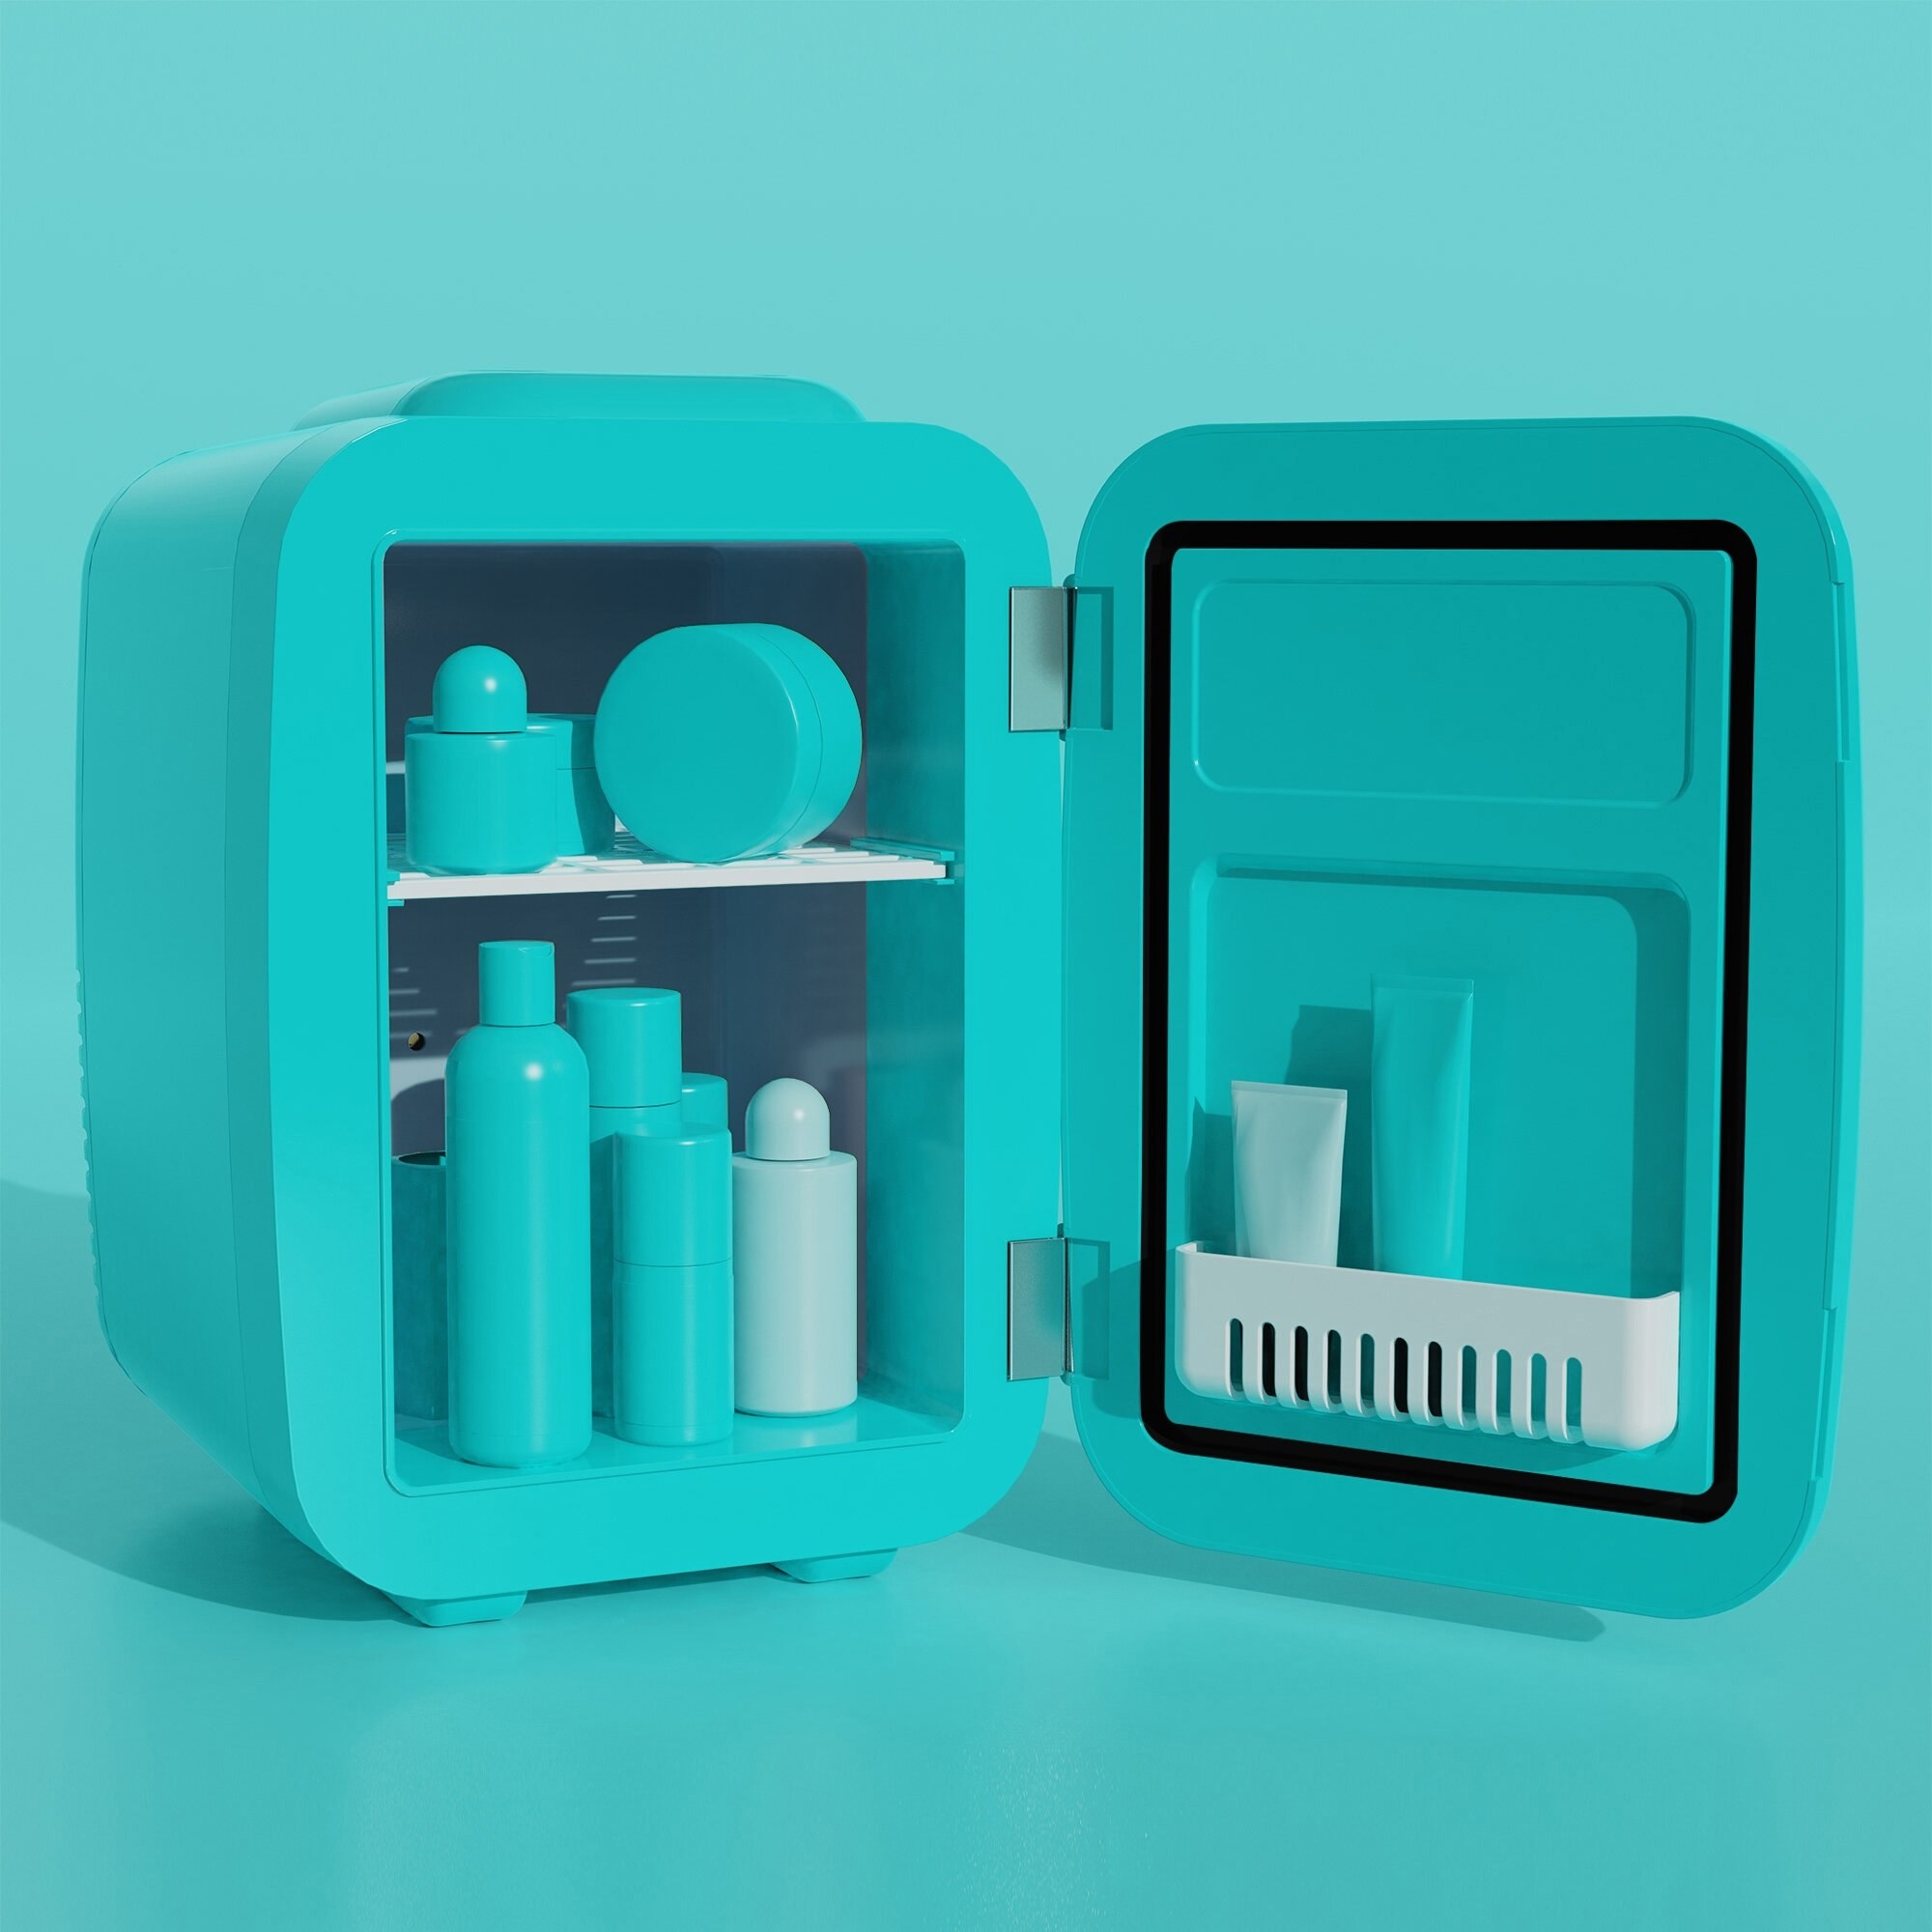 Teal mini fridge filled with team makeup product containers